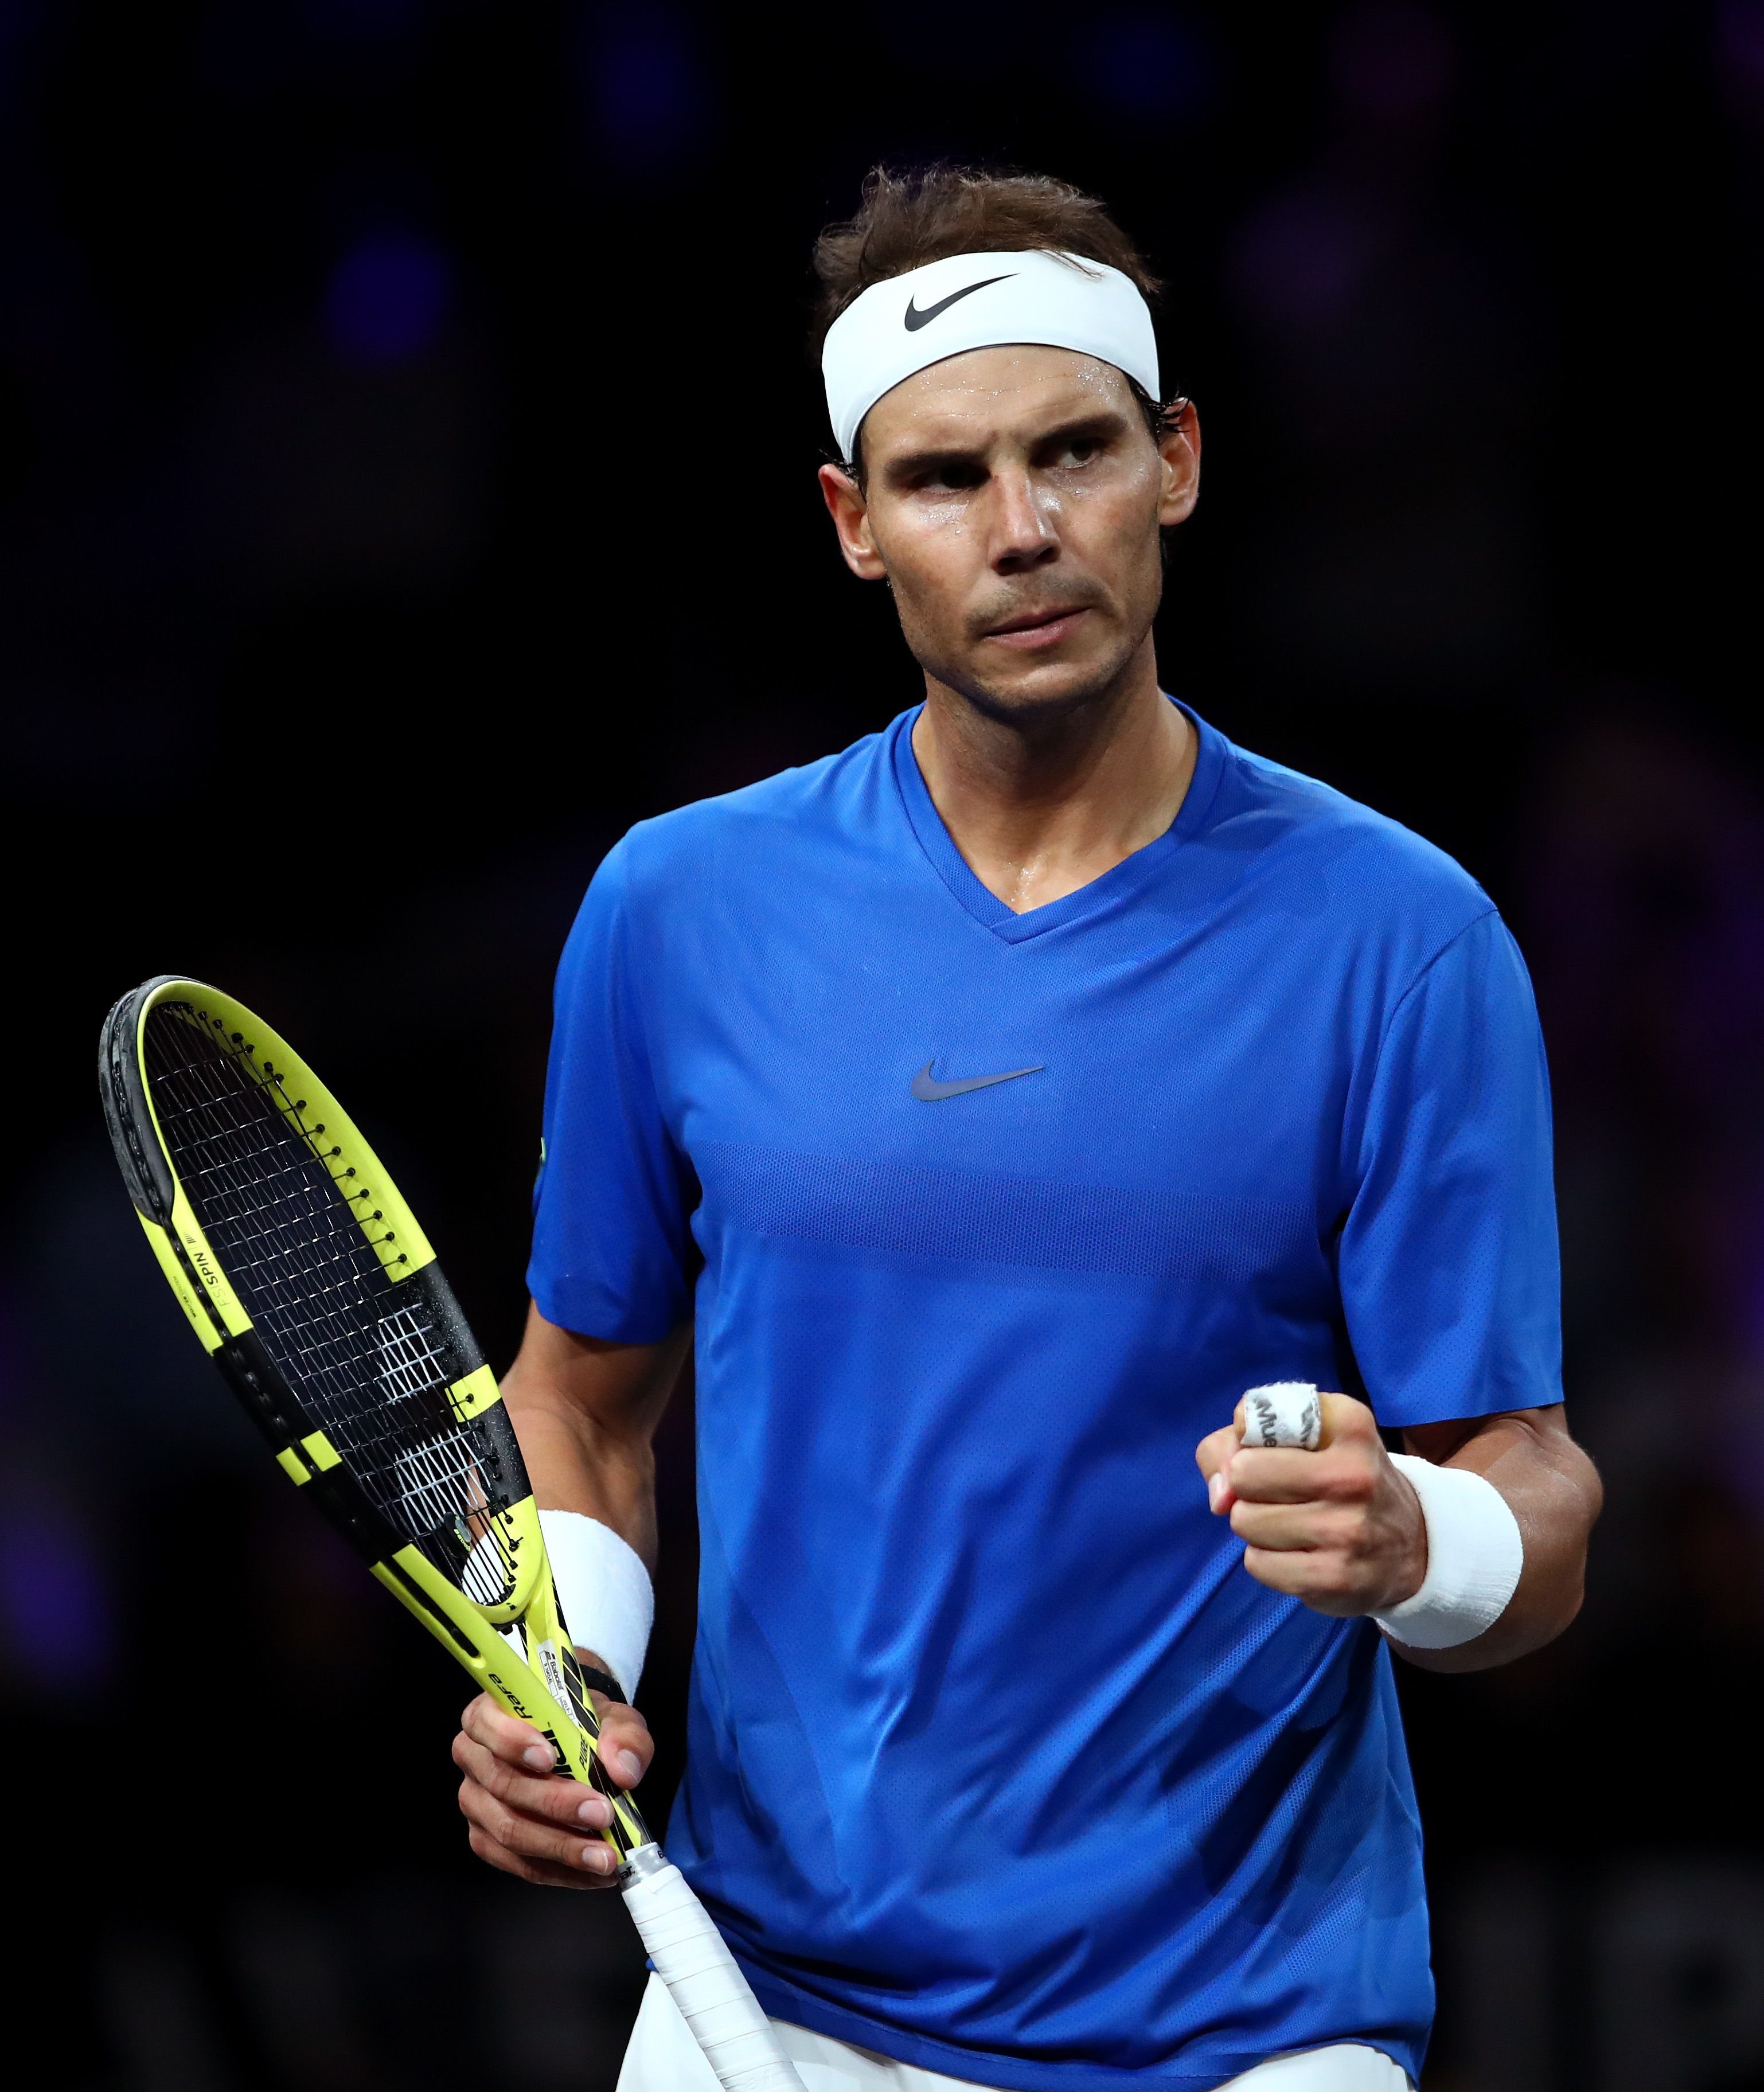 Rafael Nadal during Day Two of the Laver Cup 2019 at Palexpo on September 21, 2019 in Geneva, Switzerland. | Source: Getty Images